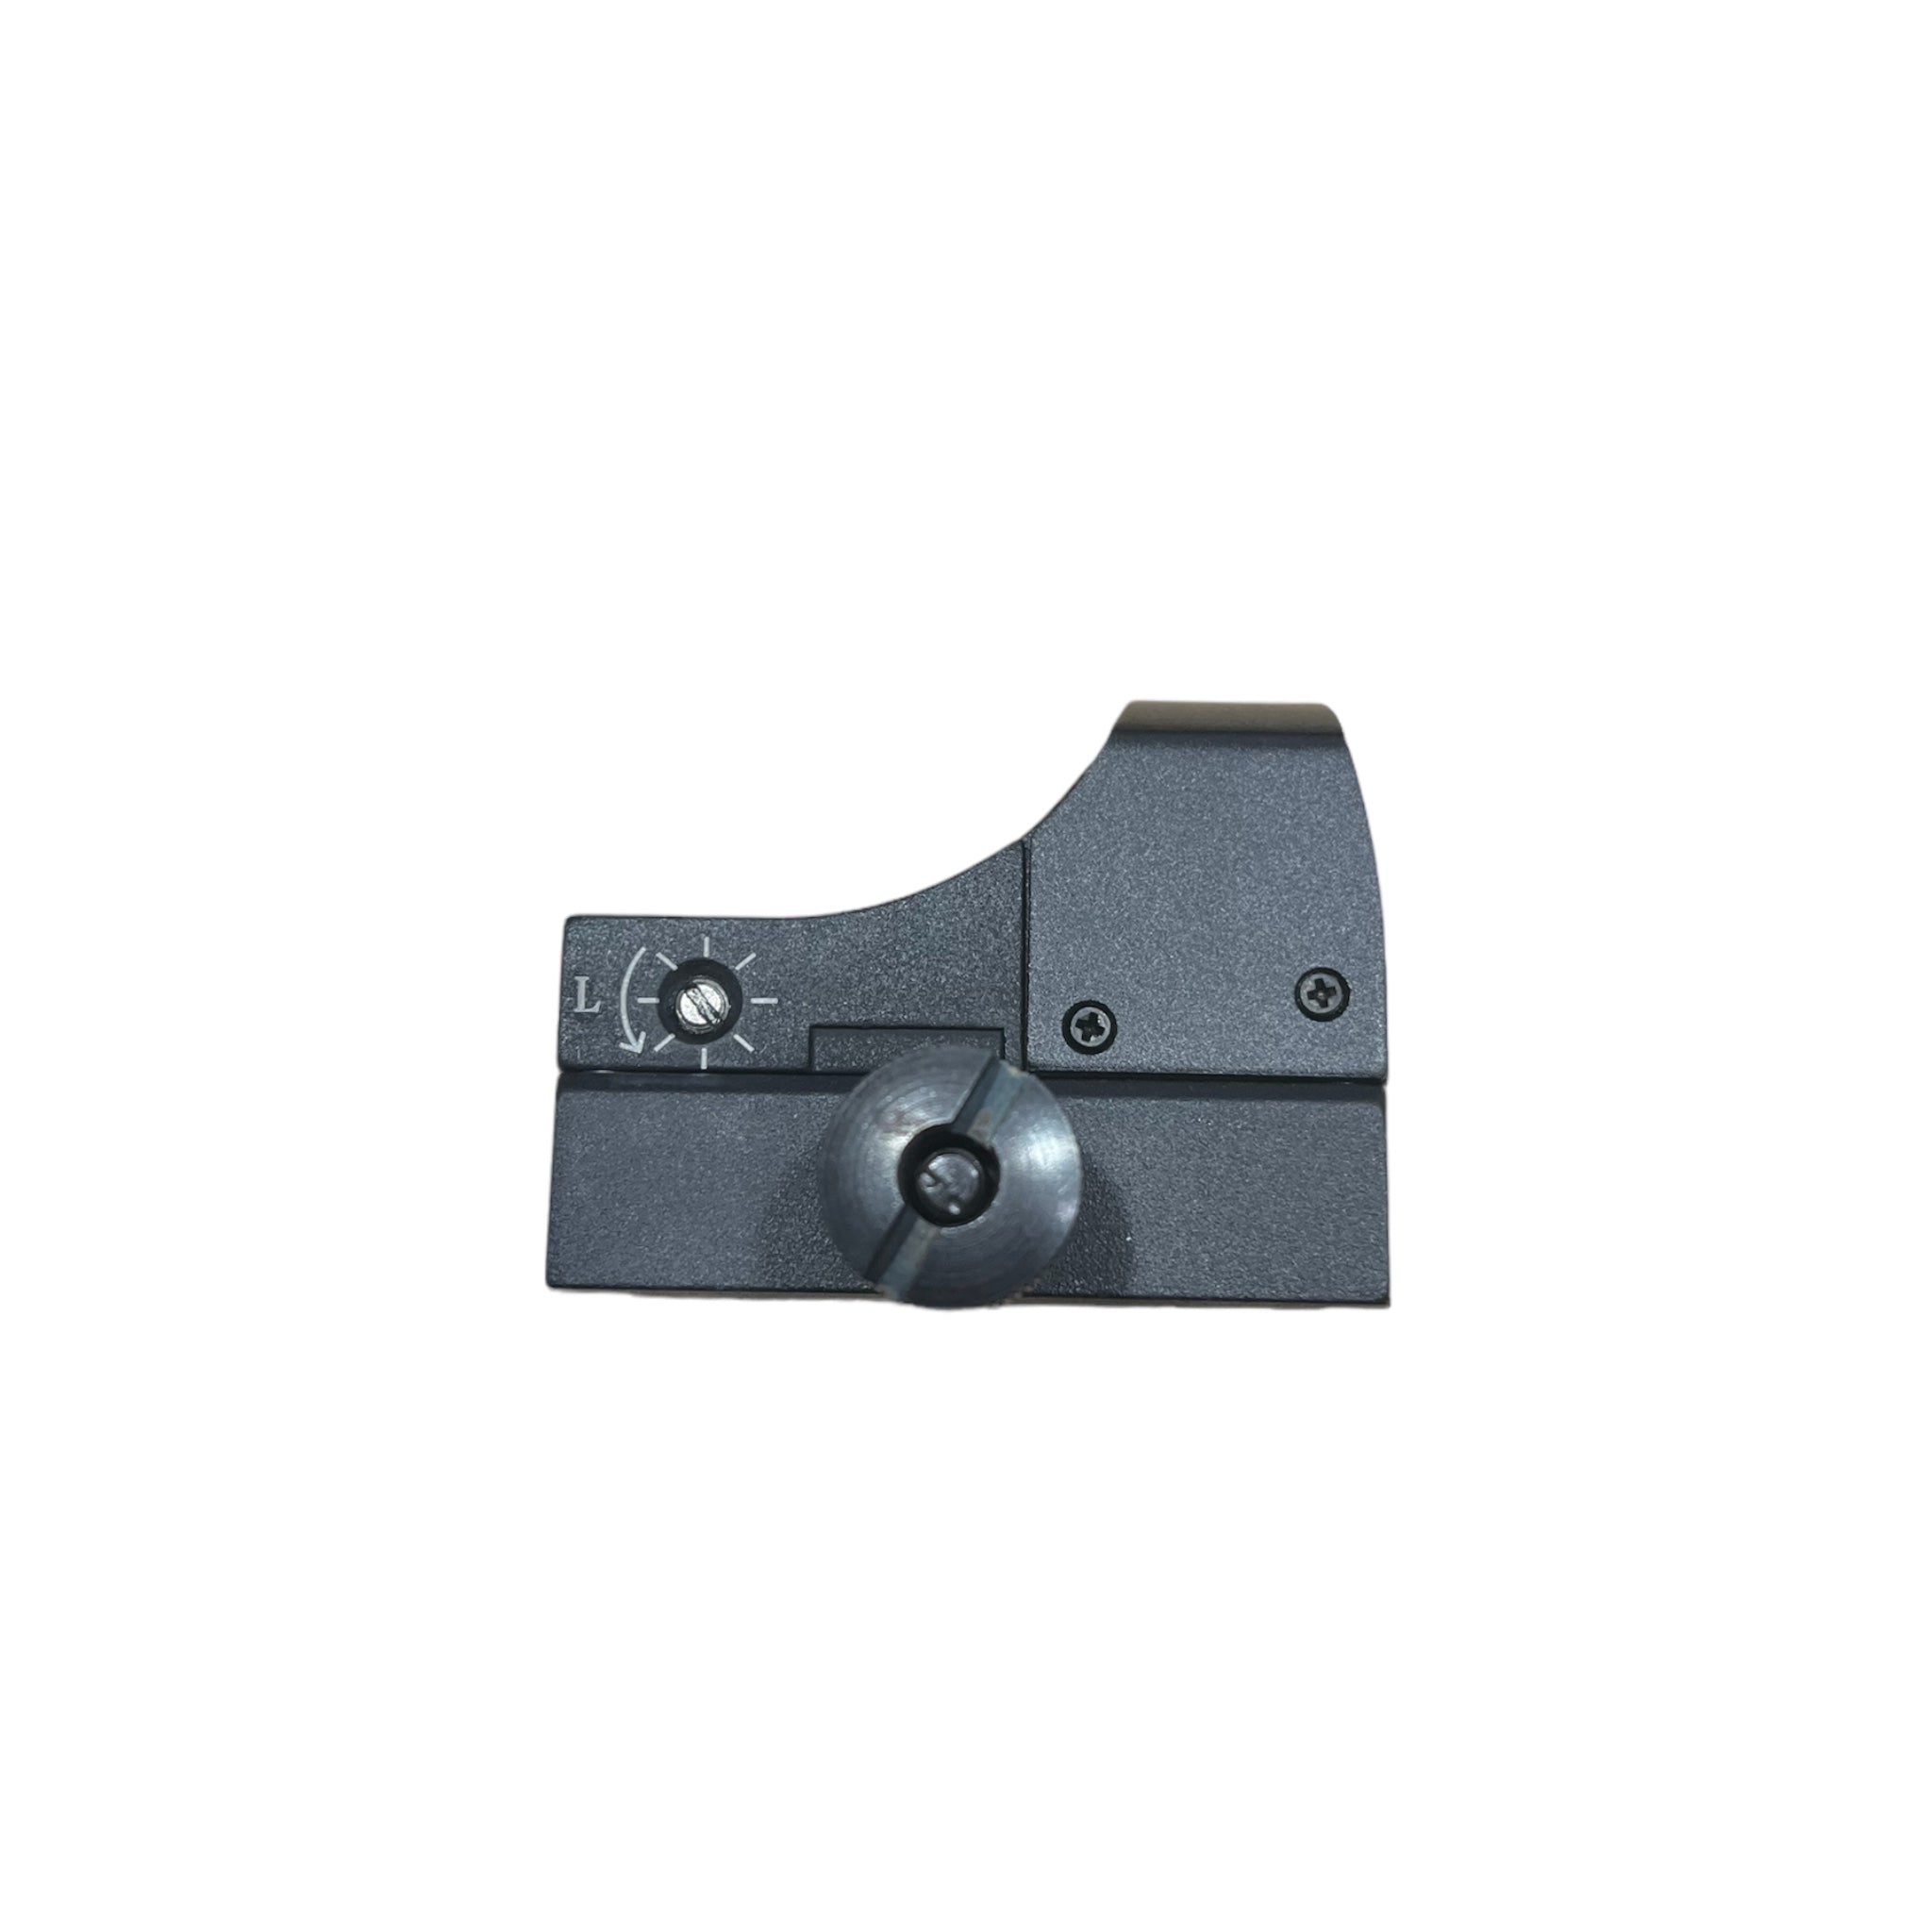 Red Dot Sight for Airsoft Pistols